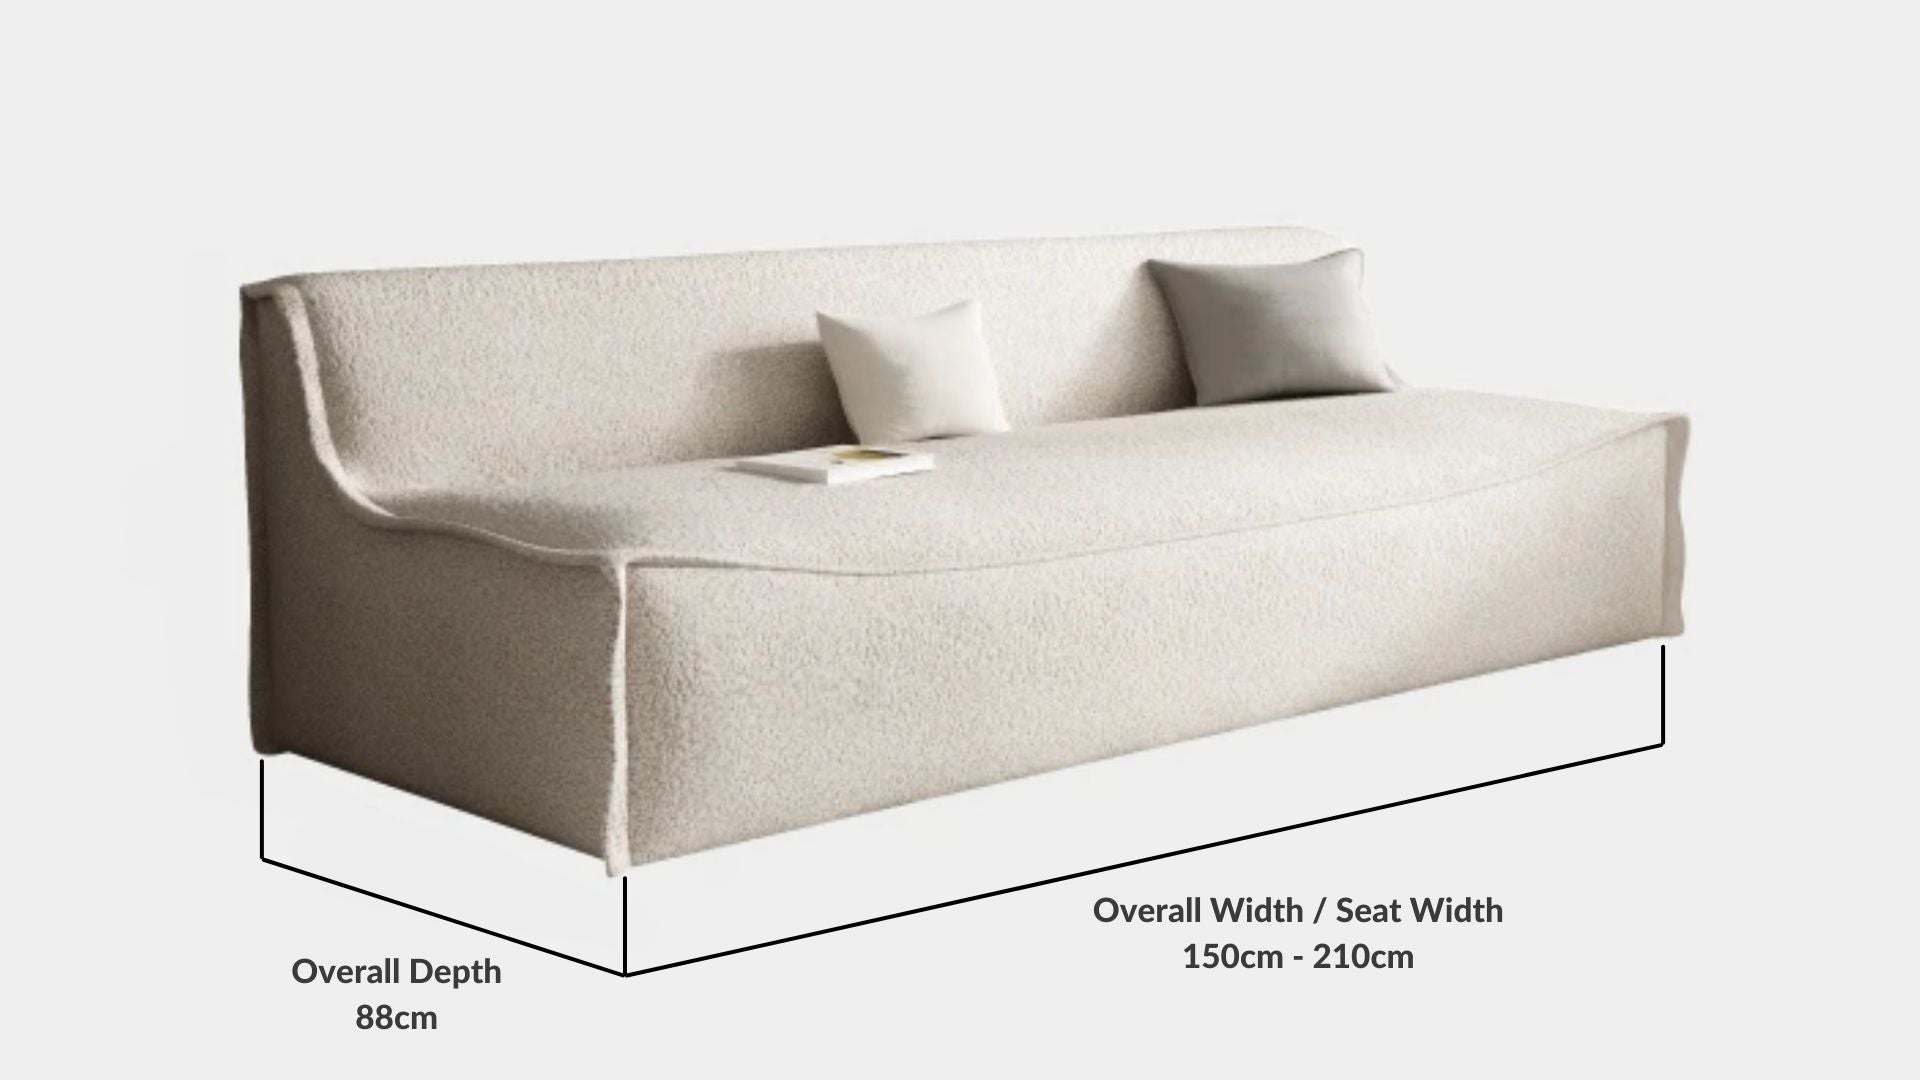 Details the key dimensions in terms of overall width, overall depth and seat width for Cubo Fabric Sofa